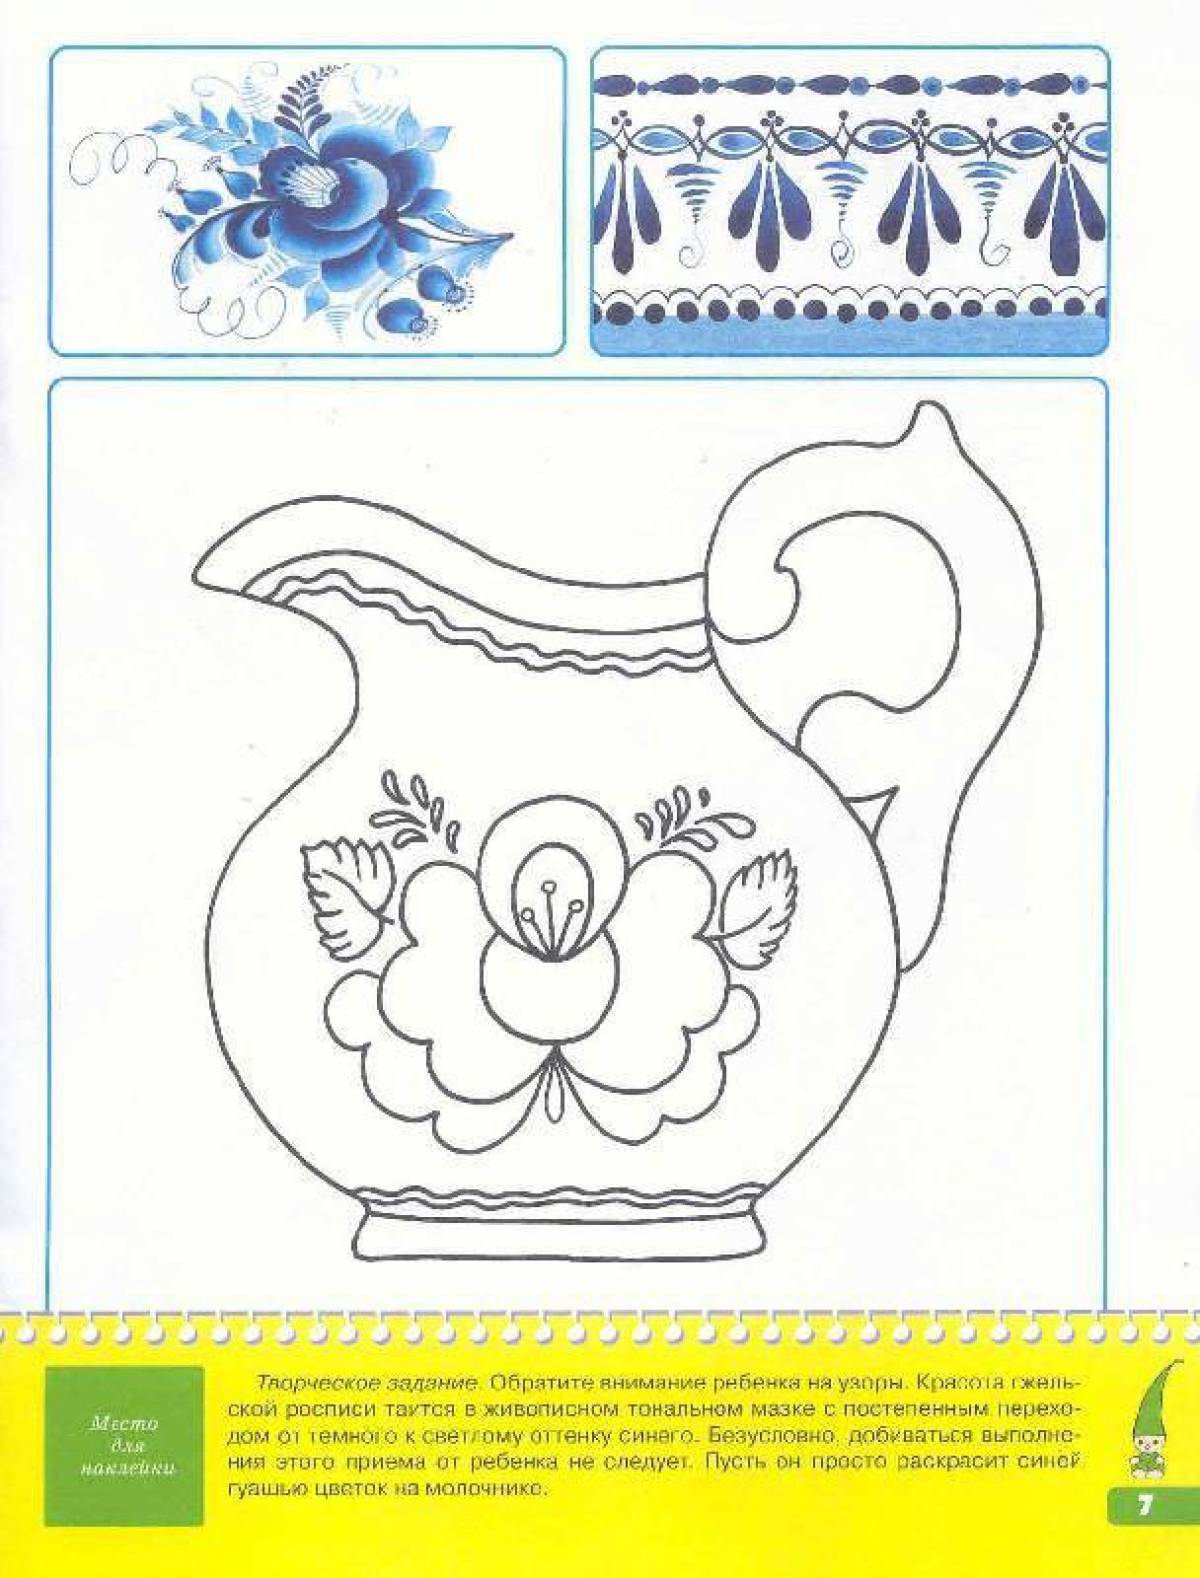 Brilliant Gzhel painting coloring book for kids